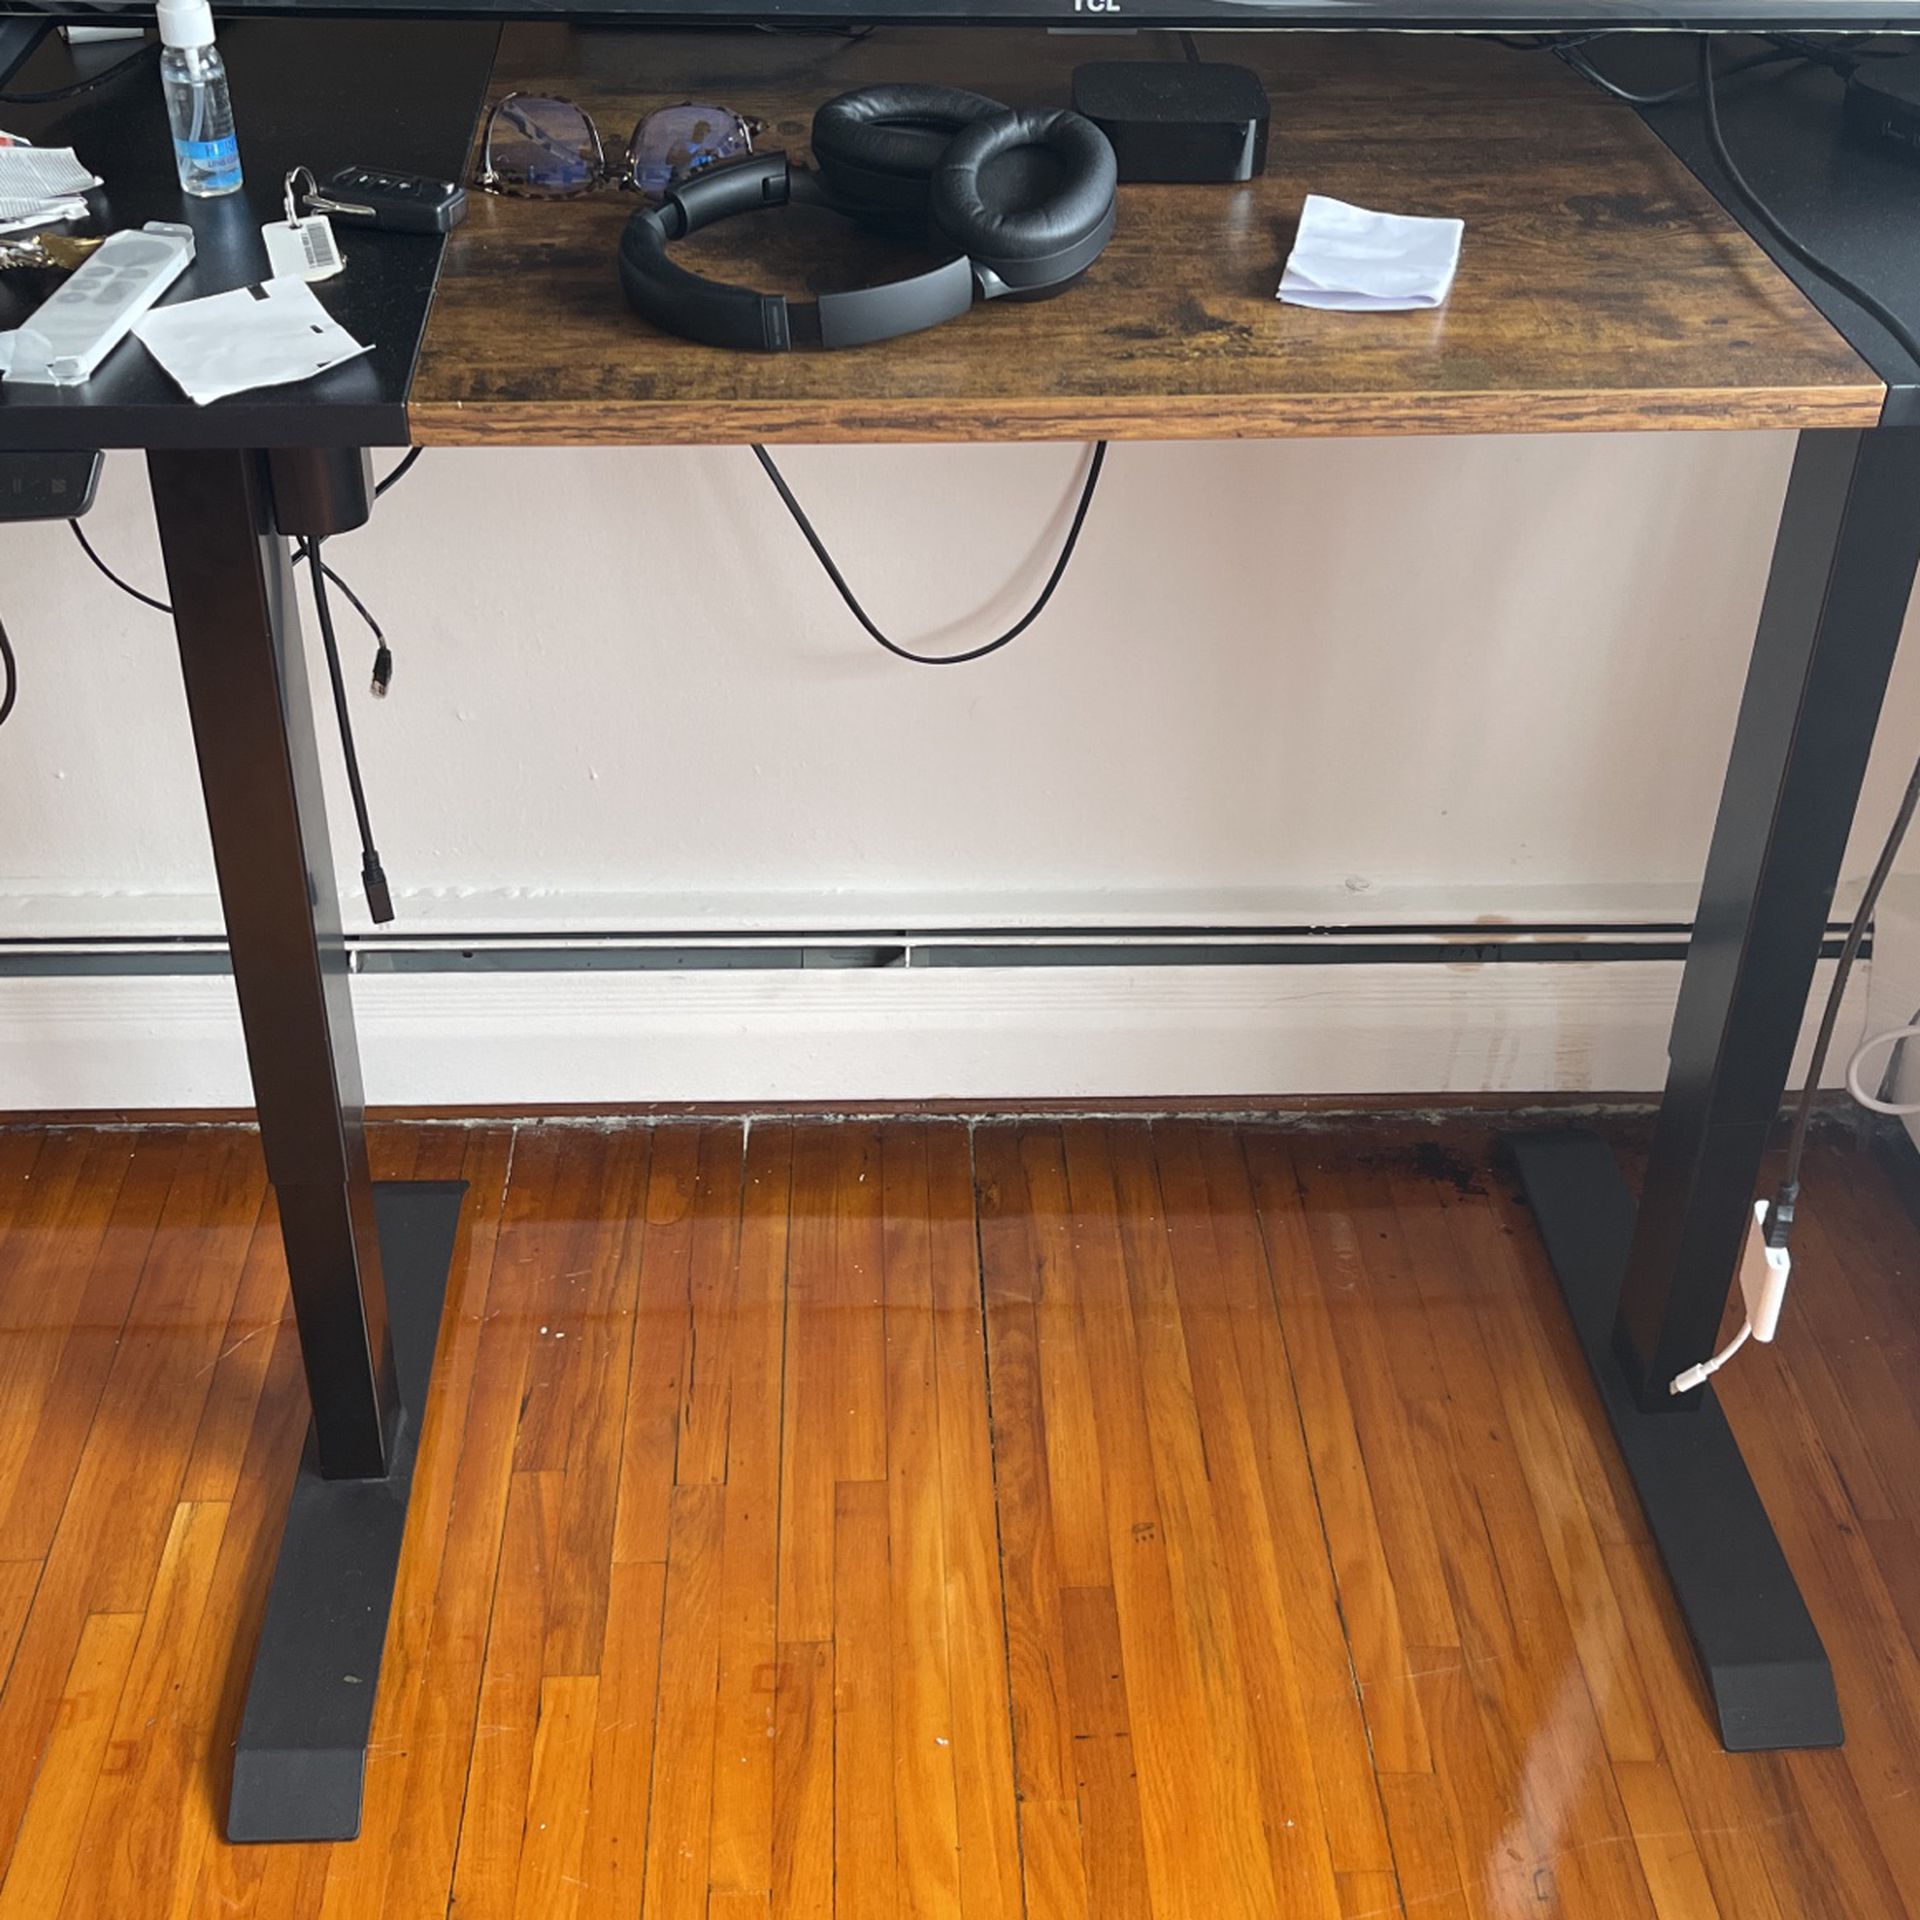 Adjustable height Standing desk. Price is negotiable (see description for amazon link)